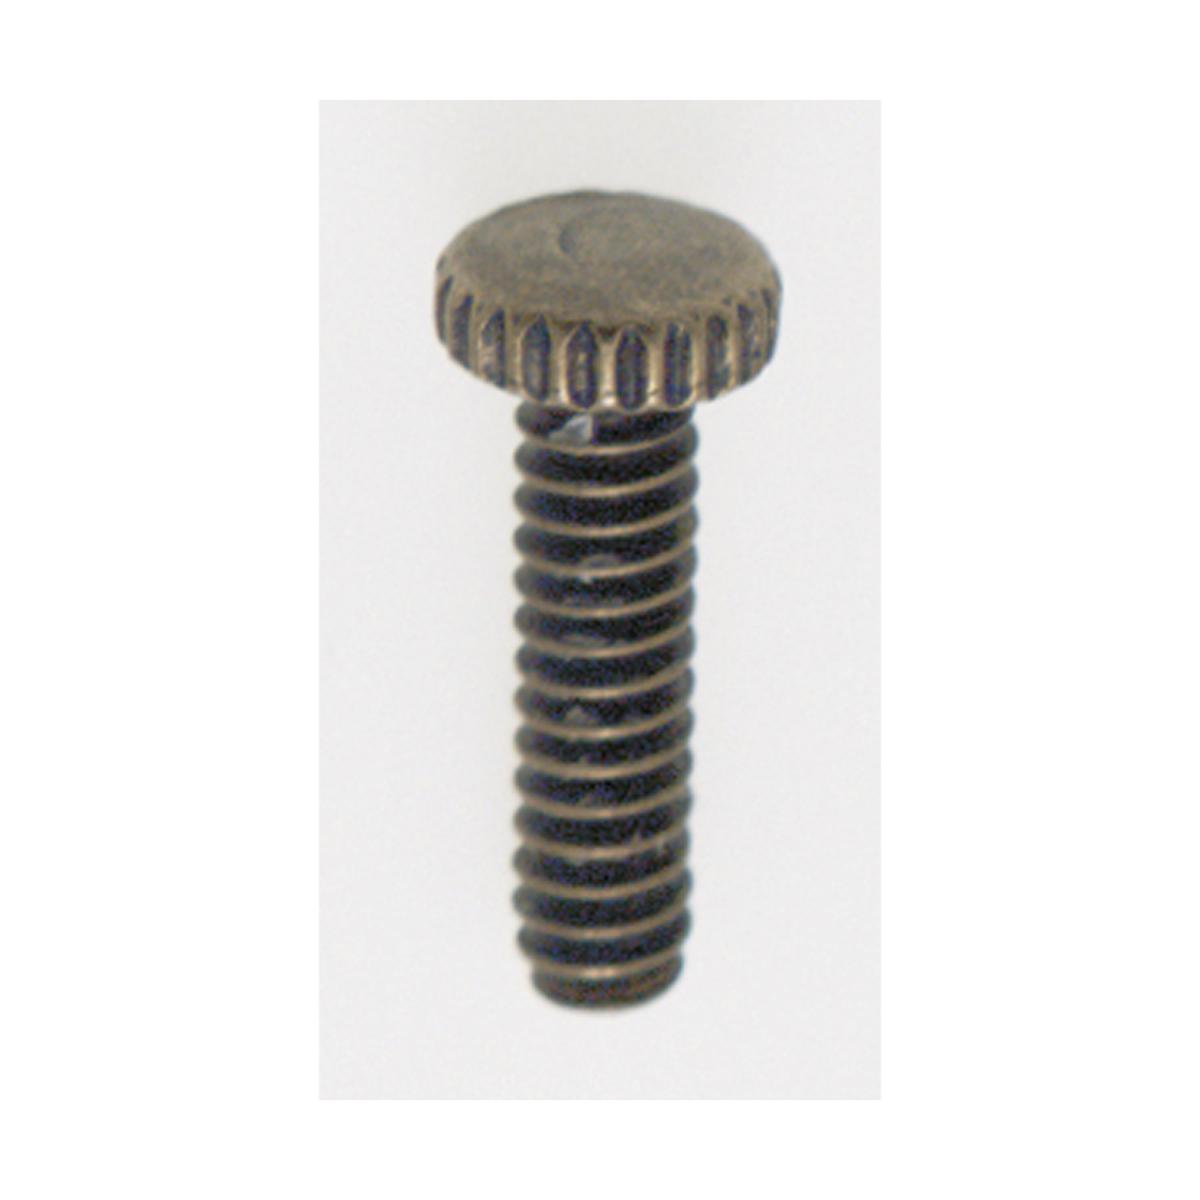 Satco 90-1155 Steel Knurled Head Thumb Screw 6/32 1/2" Length Antique Brass Plated Finish